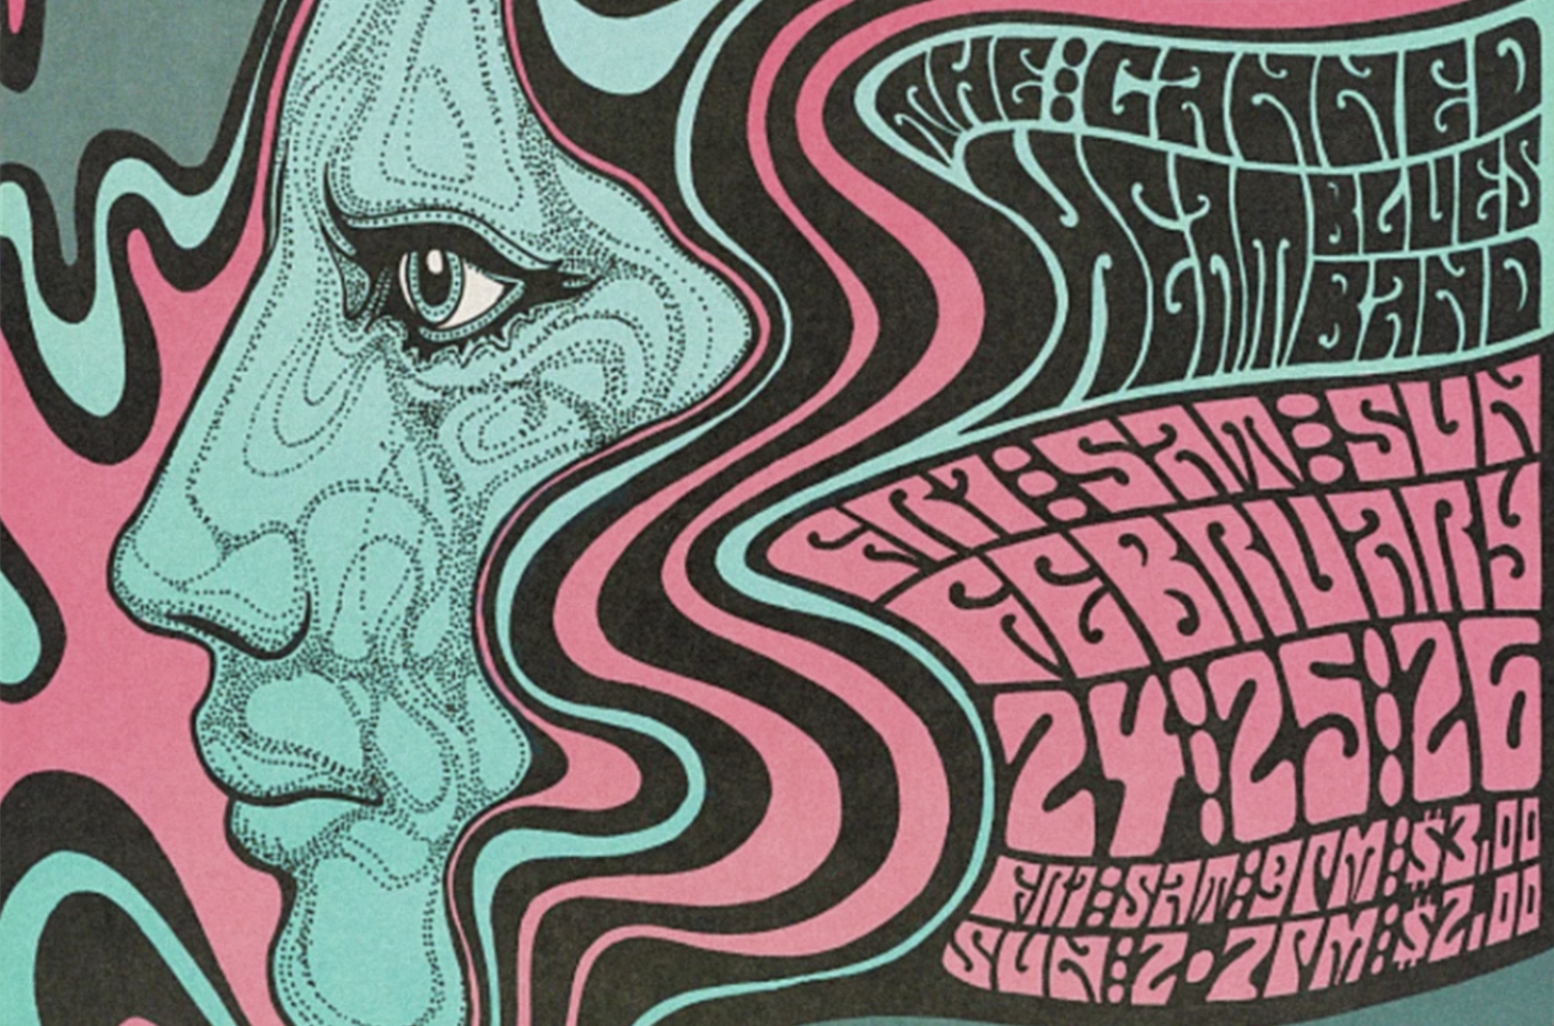 How a Psychedelic Concert Poster Rocked the World